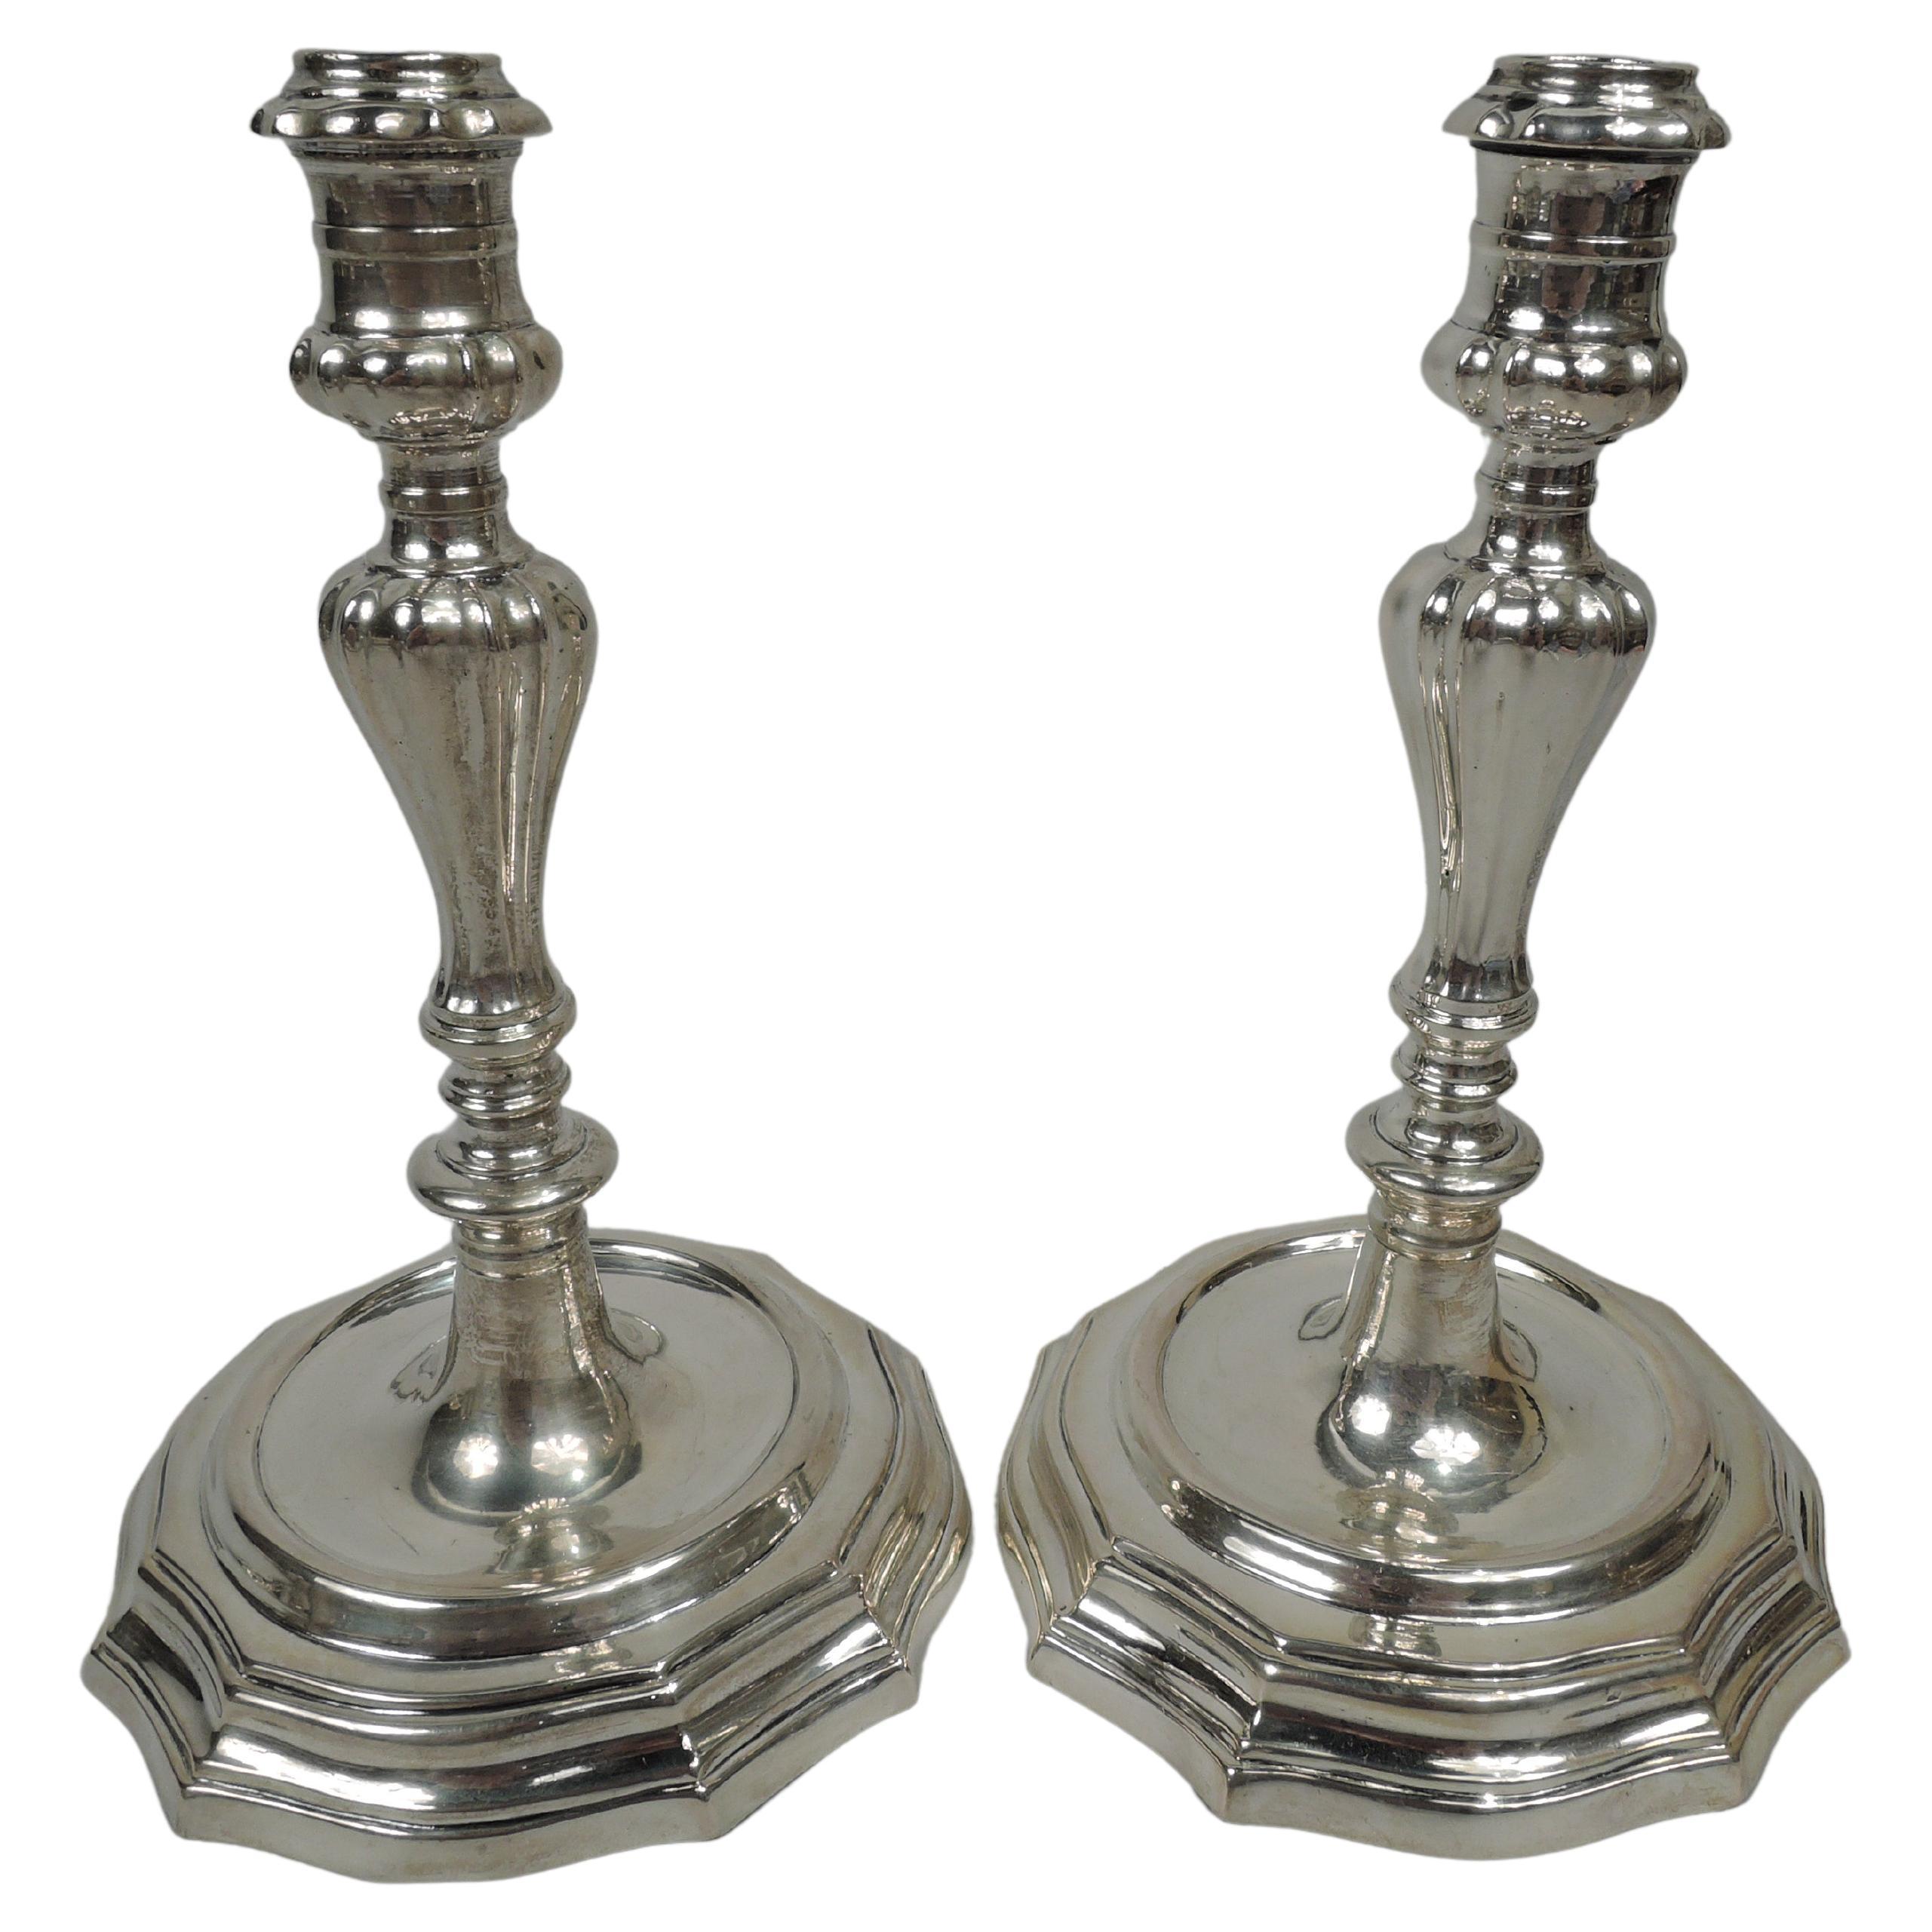 Pair of Classical Silver Candlesticks with Florentine Assayer’s Stamp